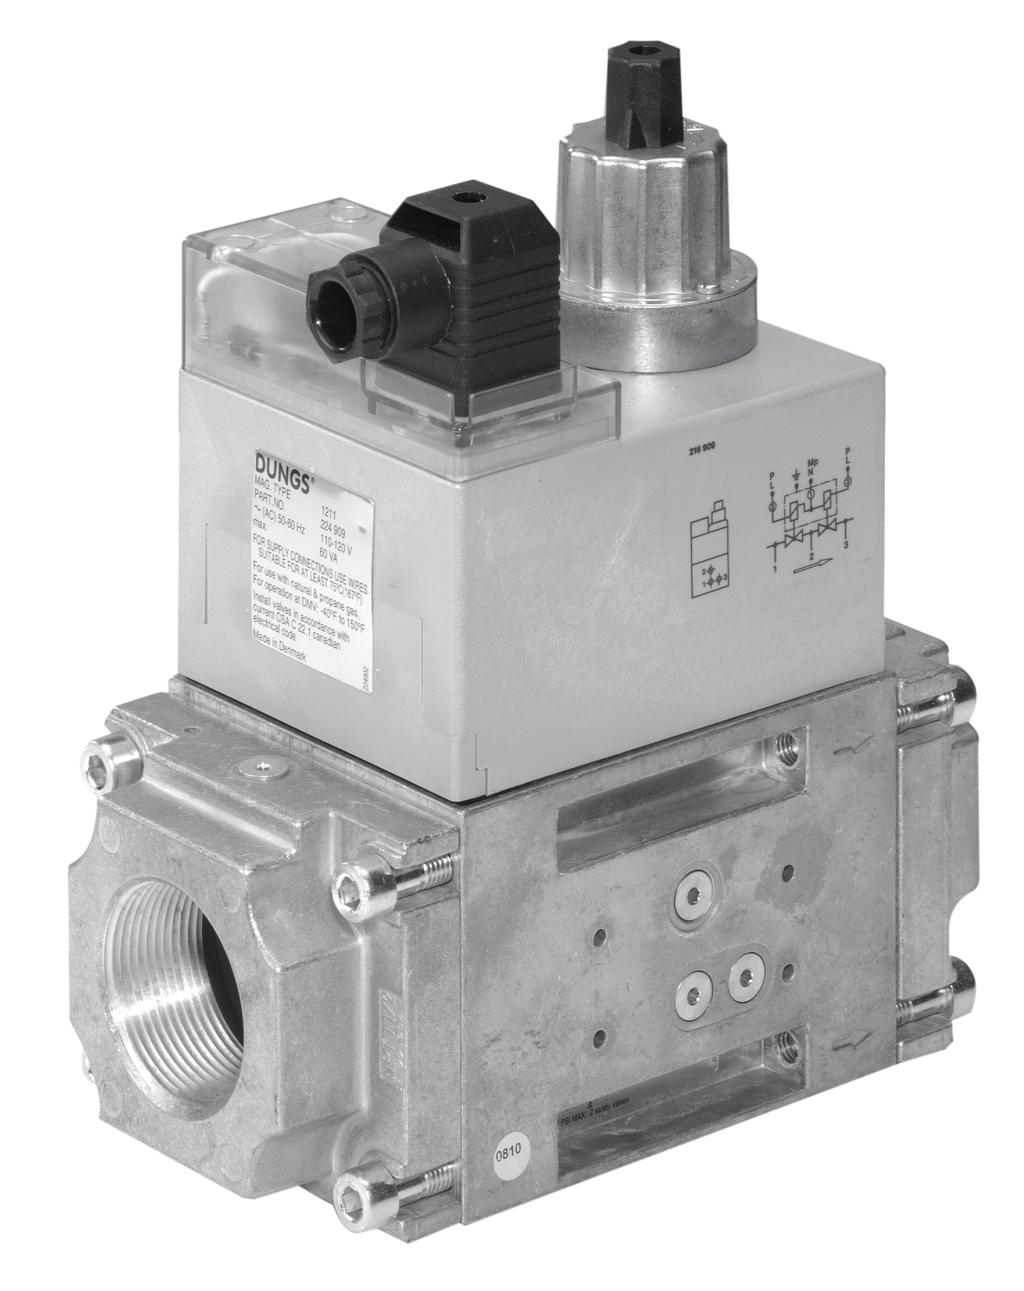 Dual Modular Safety Shutoff Valves DMV-D/602 Series DMV-DLE/602 Series Two normally closed safety shutoff valves in one housing; each with the following approvals.